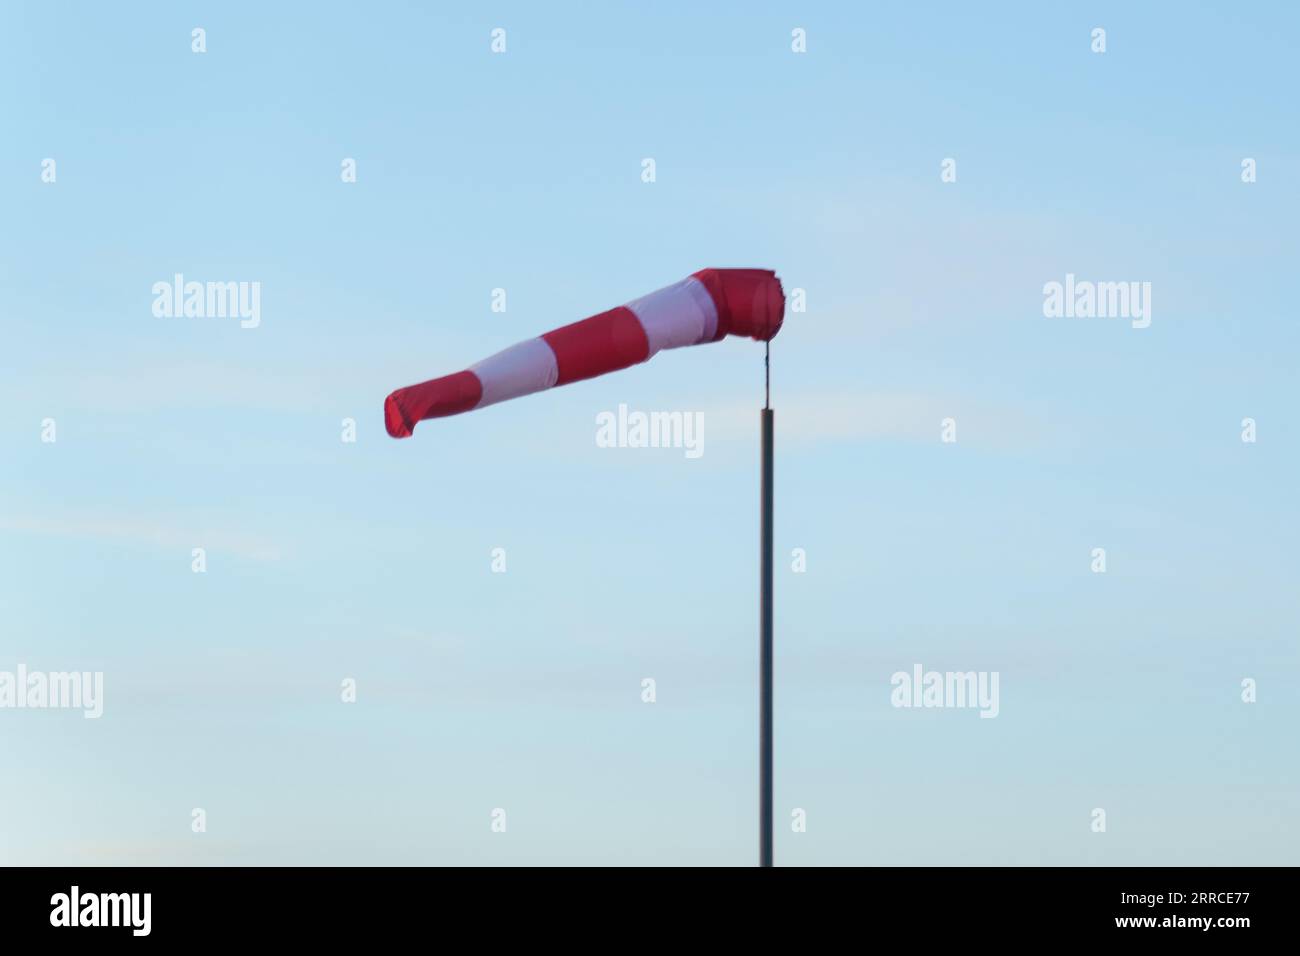 A red and white wind cone indicating the direction and strength of the wind. Strong wind, cone in horizontal position. Stock Photo